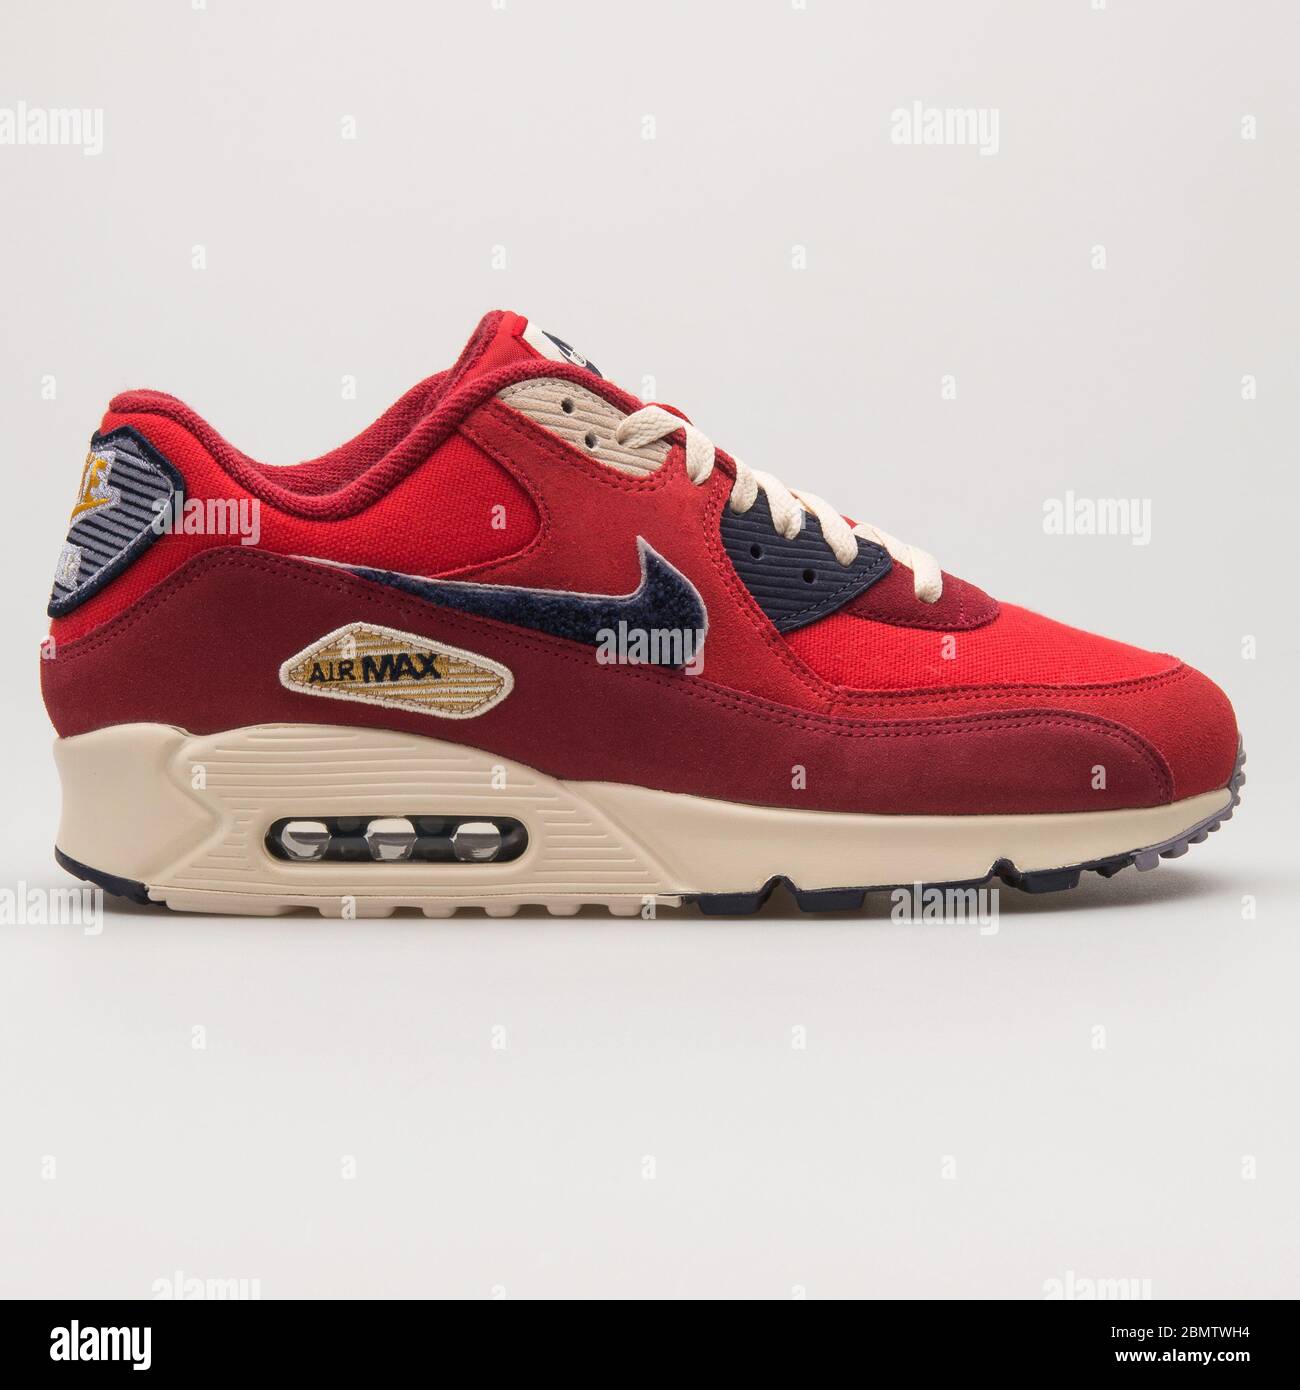 VIENNA, AUSTRIA - JUNE 14, 2018: Nike Air Max 90 Premium Suede red, sail  and purple sneaker on white background Stock Photo - Alamy